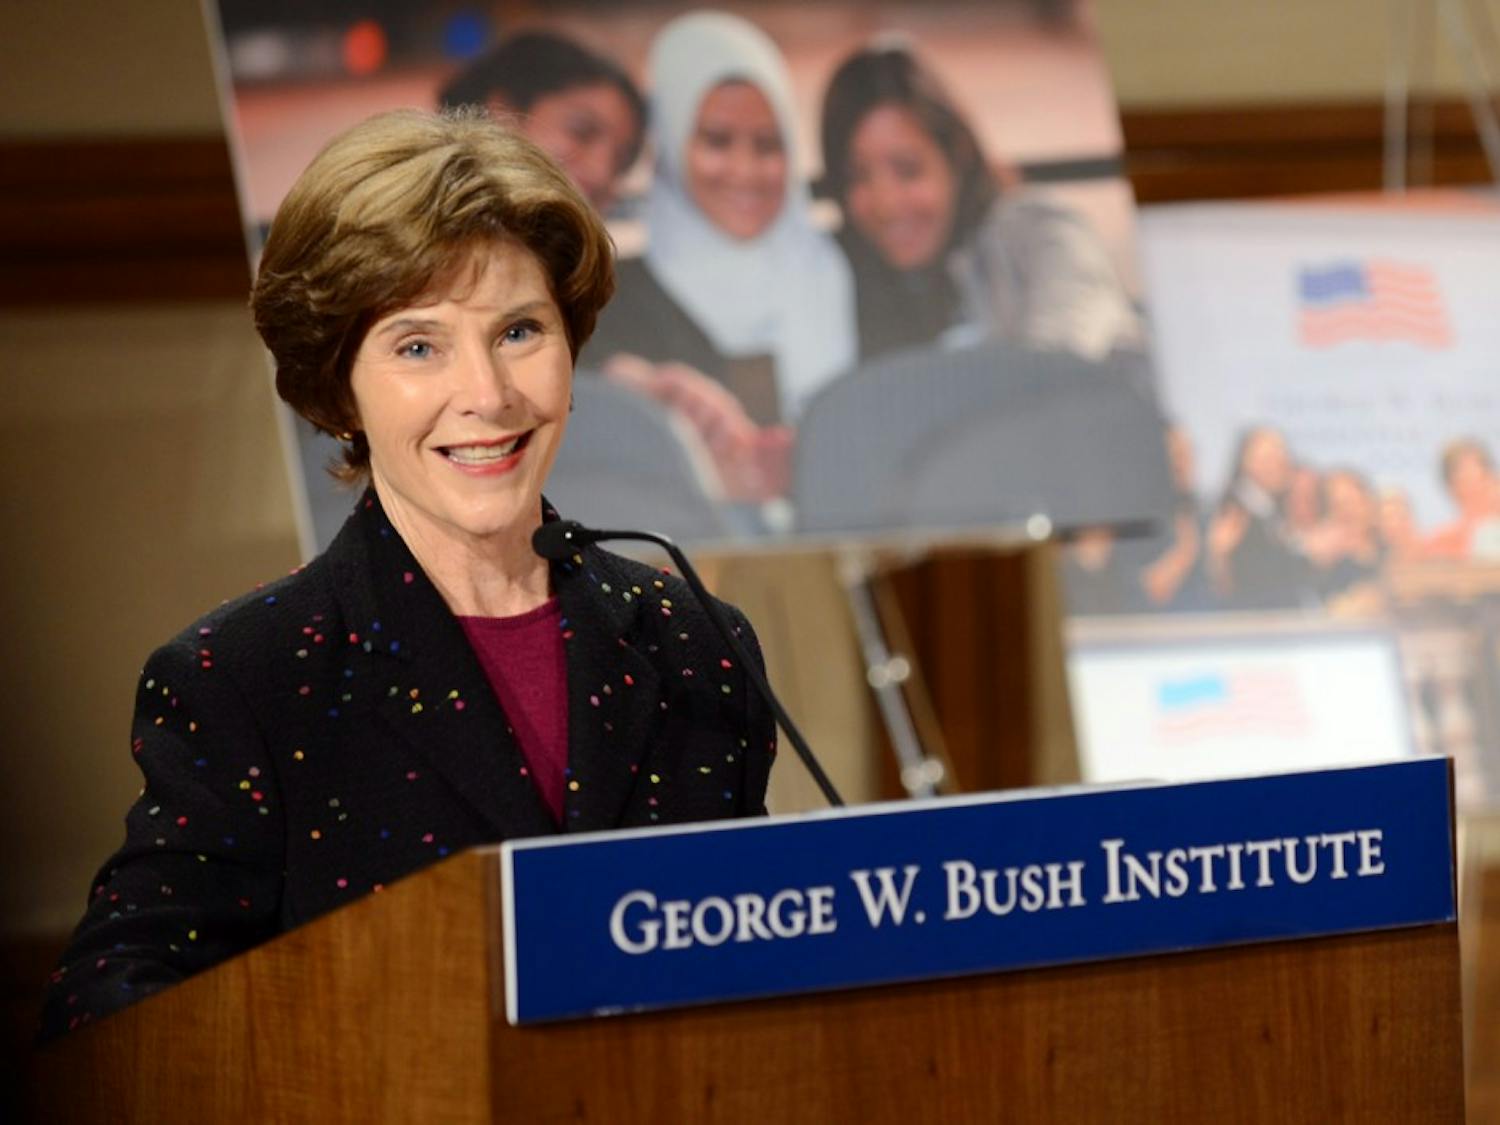 Former First Lady Laura Bush speaks at a Bush Institute event celebrating International Women's Day.